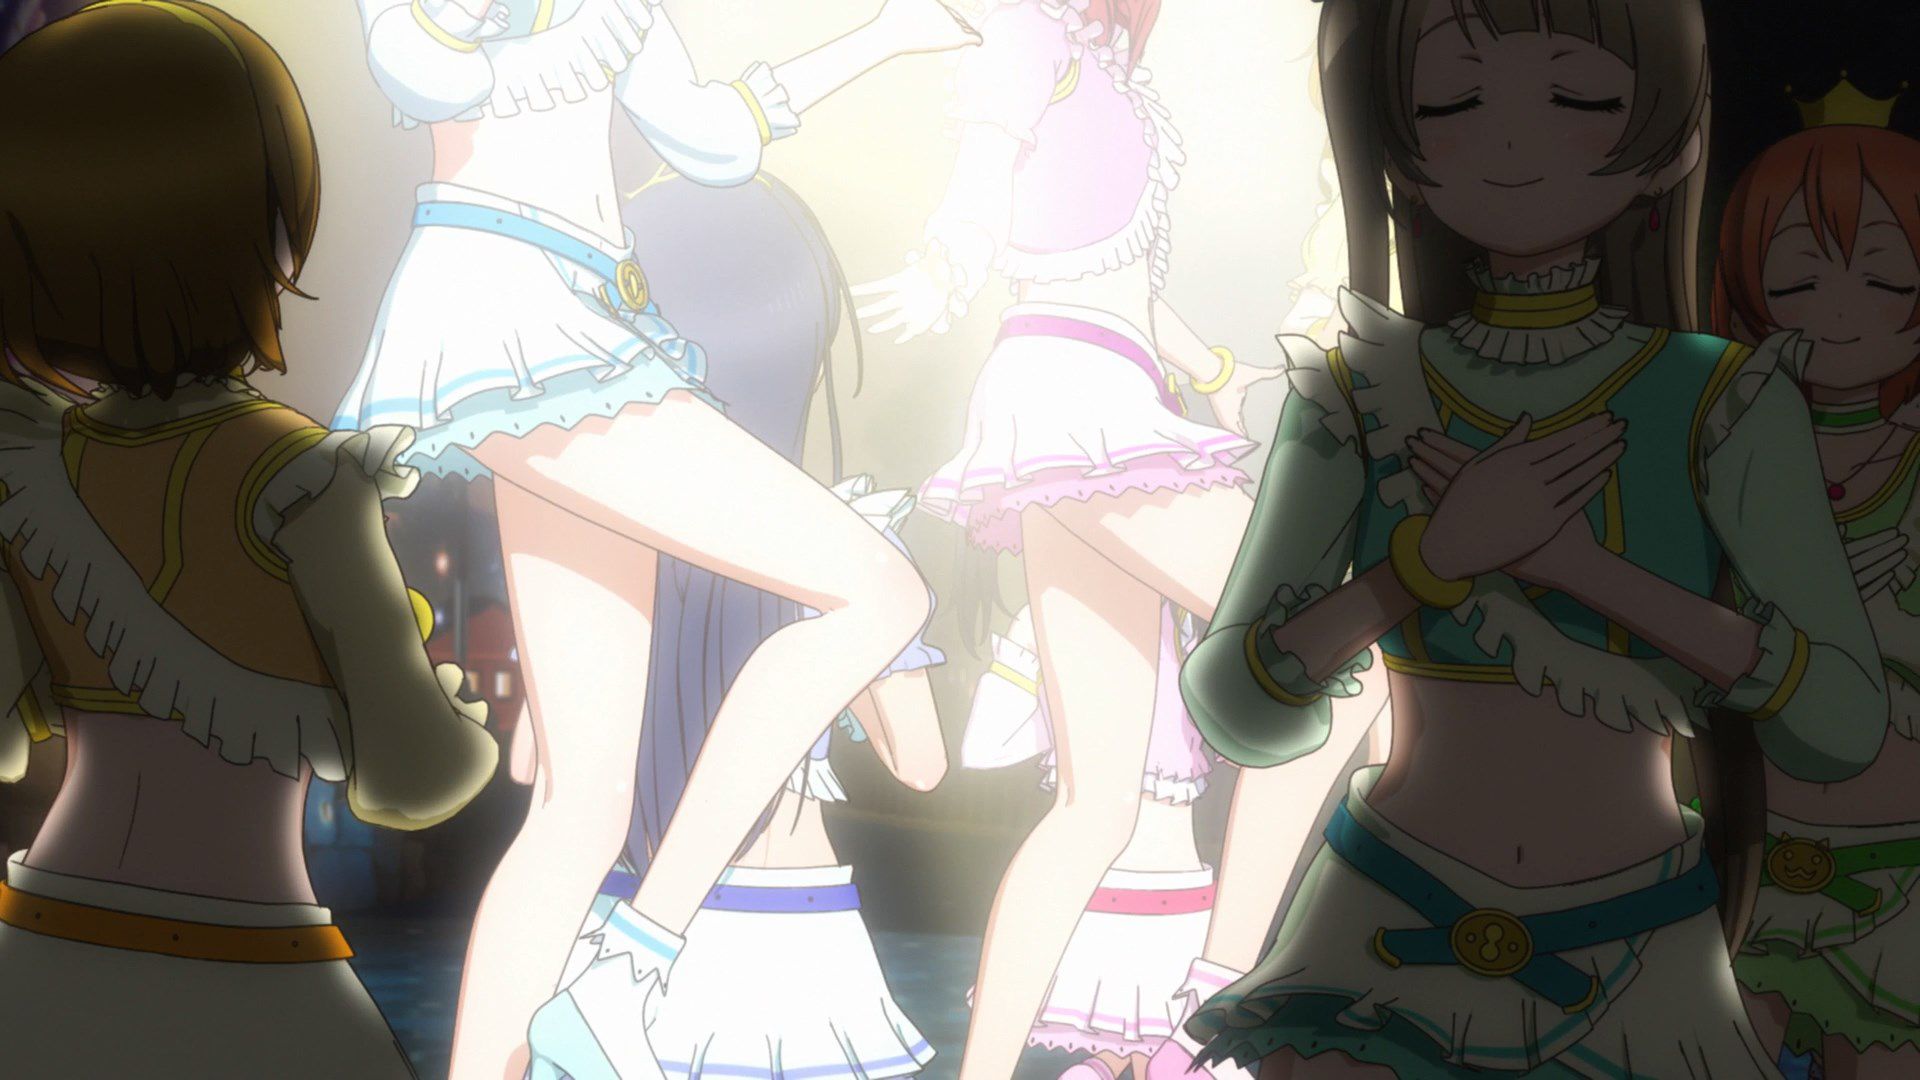 [God images] "love live! ' Μm ' PV's leg is too erotic everyone wakes up to a leg fetish of wwwww 54